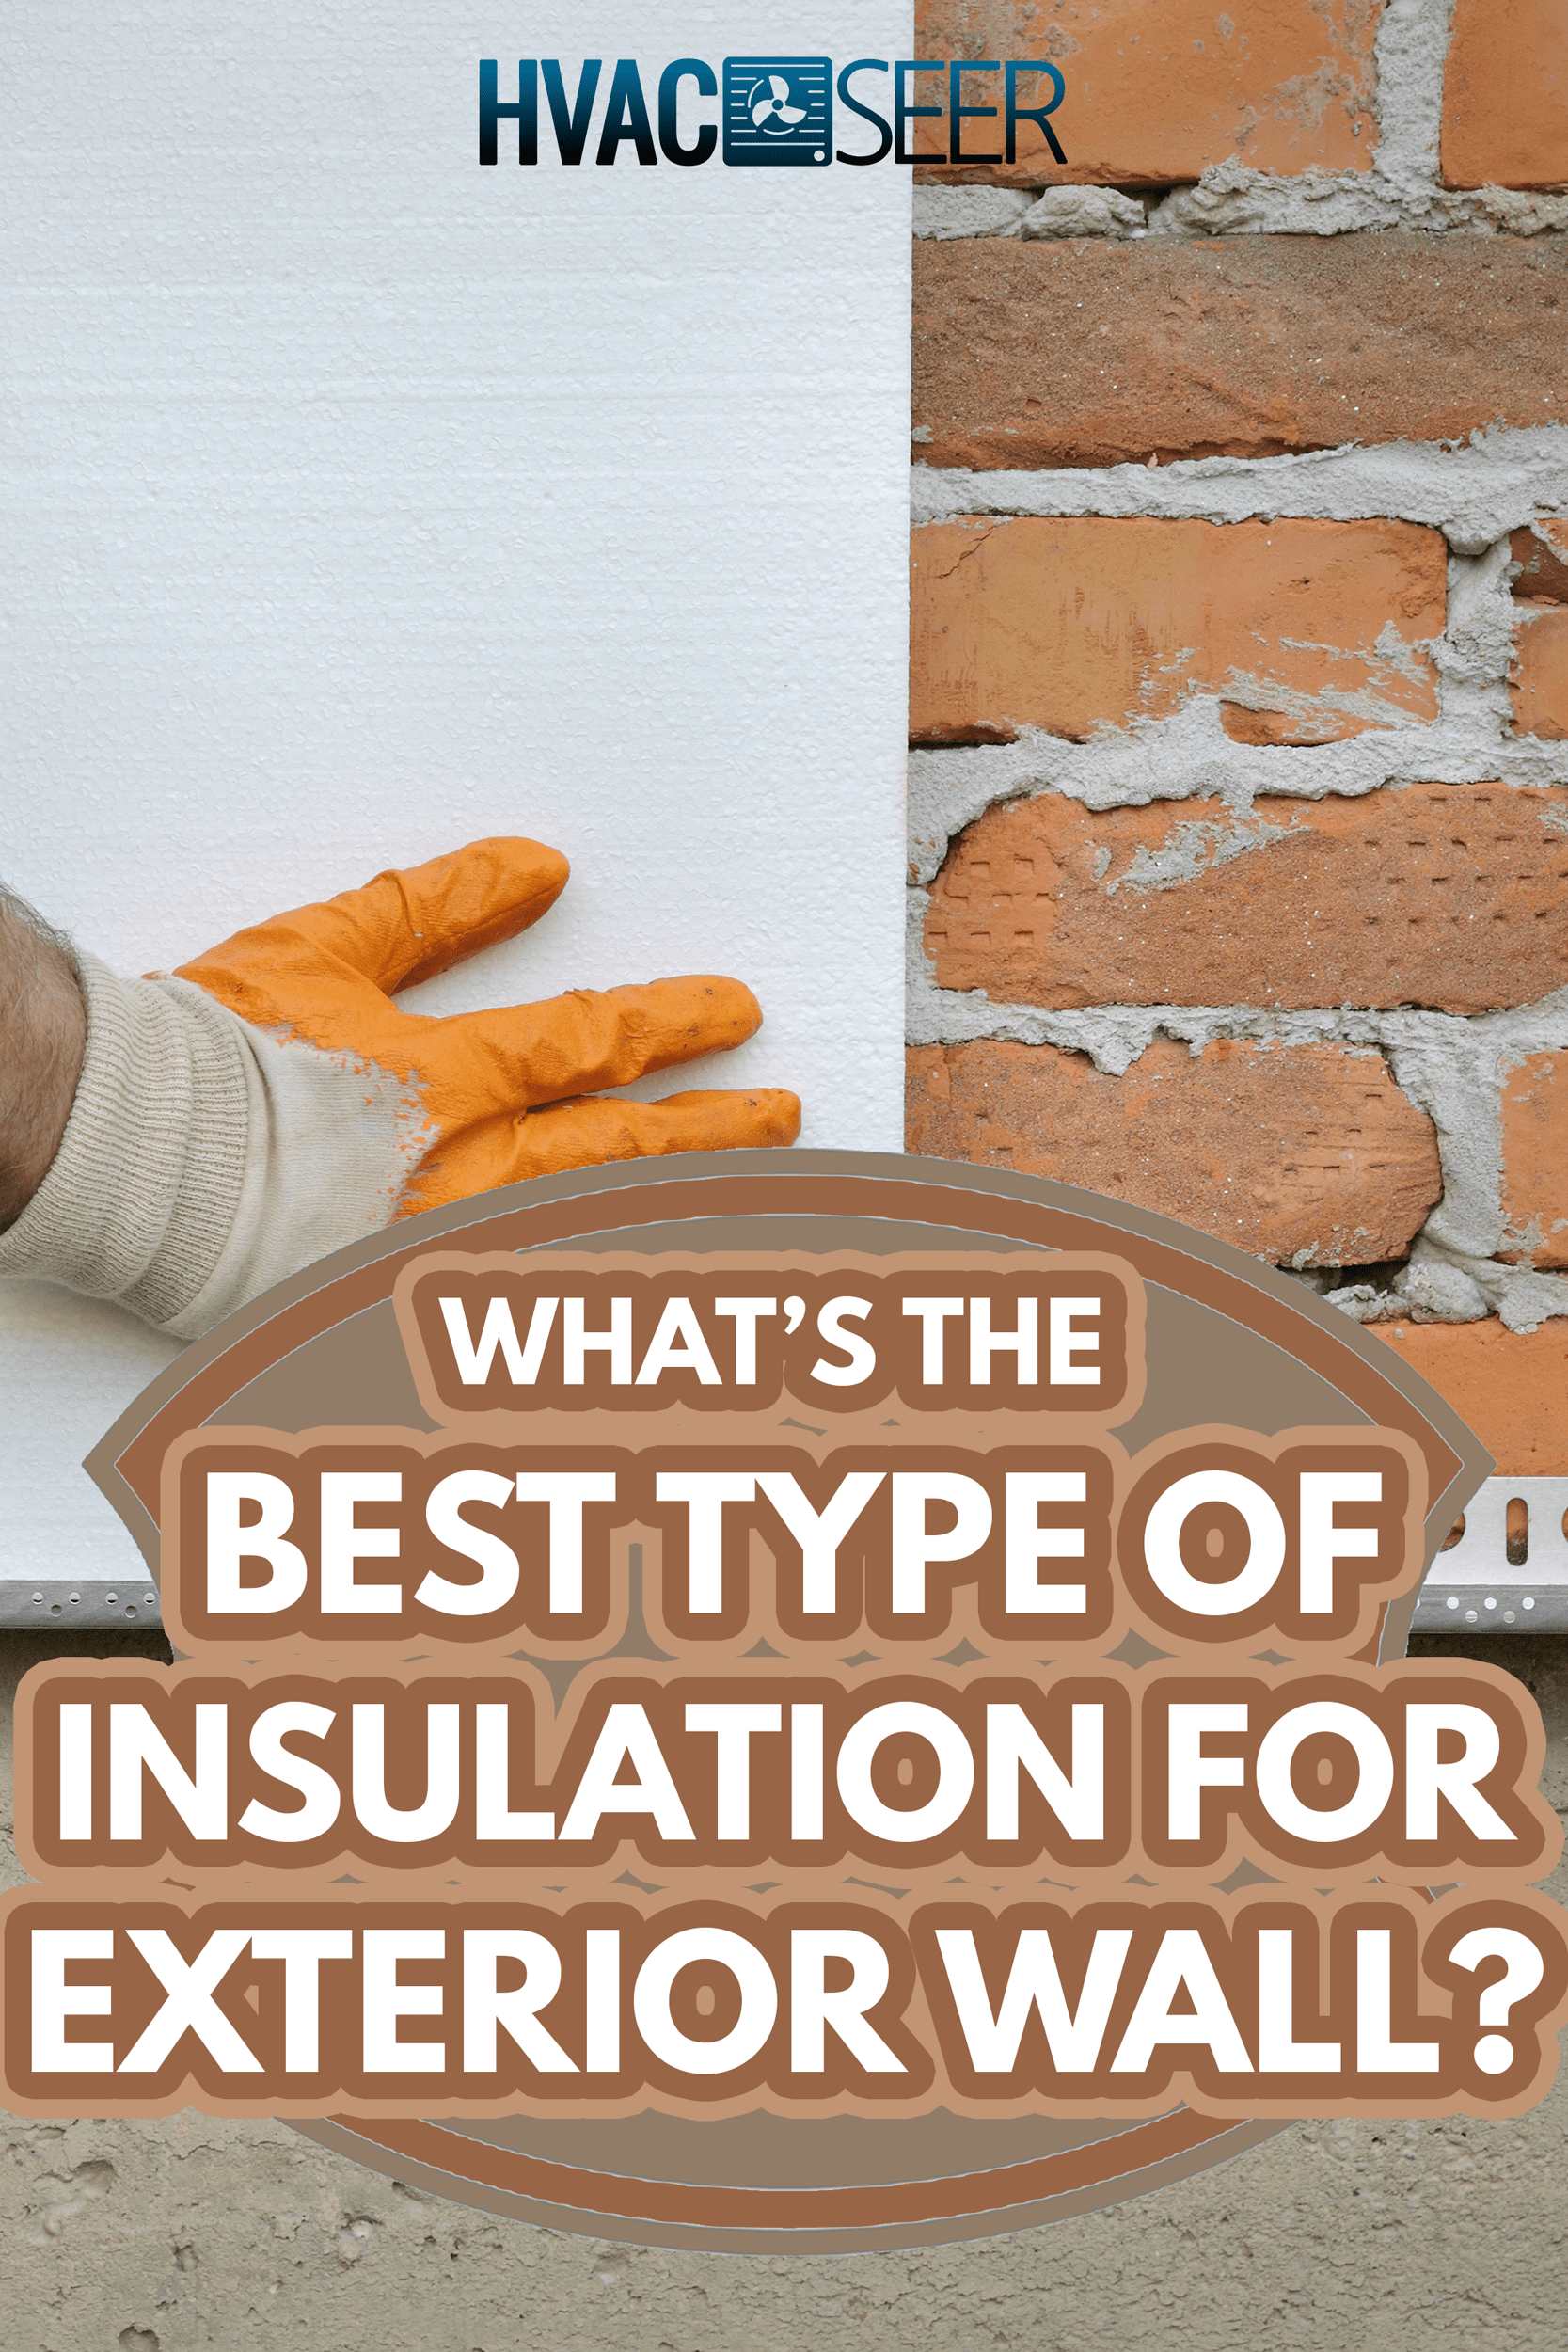 Construction Worker Insulating Wall with Fiberglass Batt - What's The Best Type Of Insulation For Exterior Walls